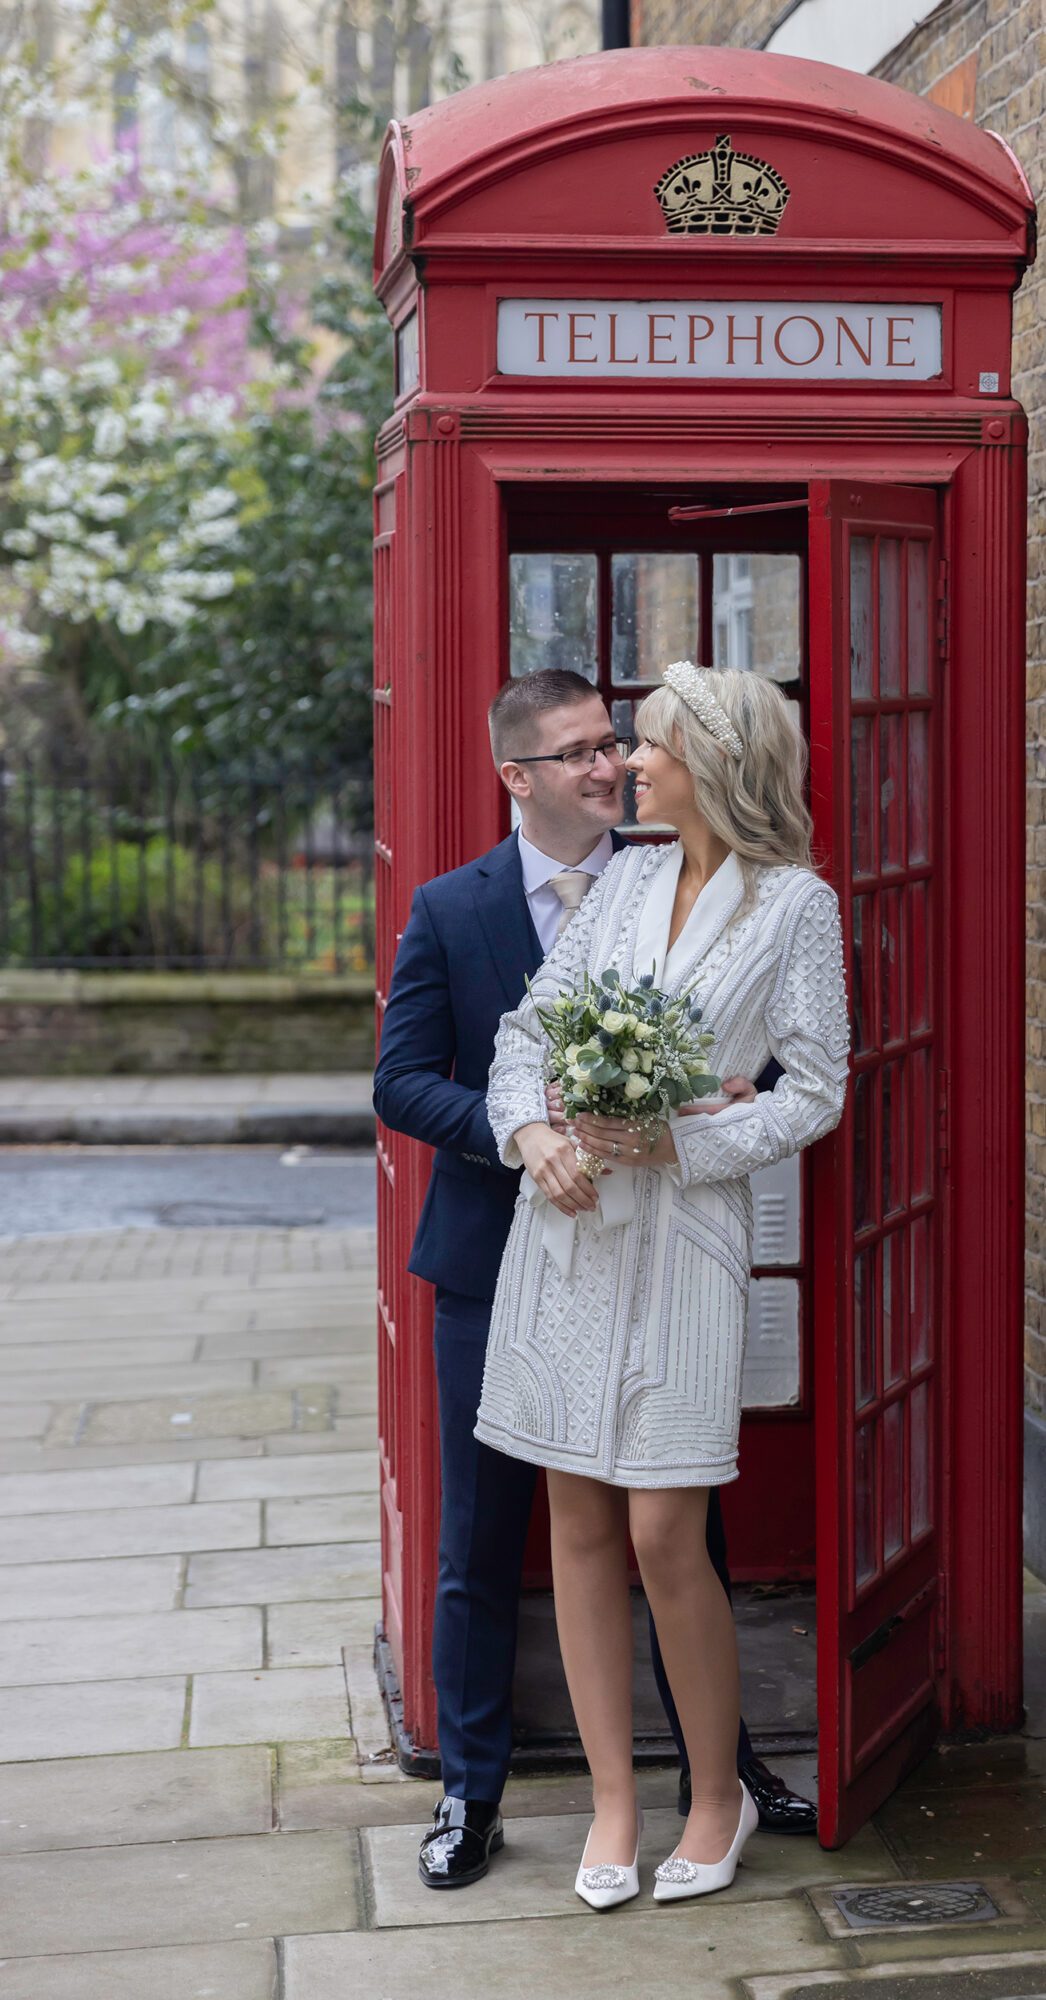 Chelsea Old Town Hall wedding couple in red phone box together